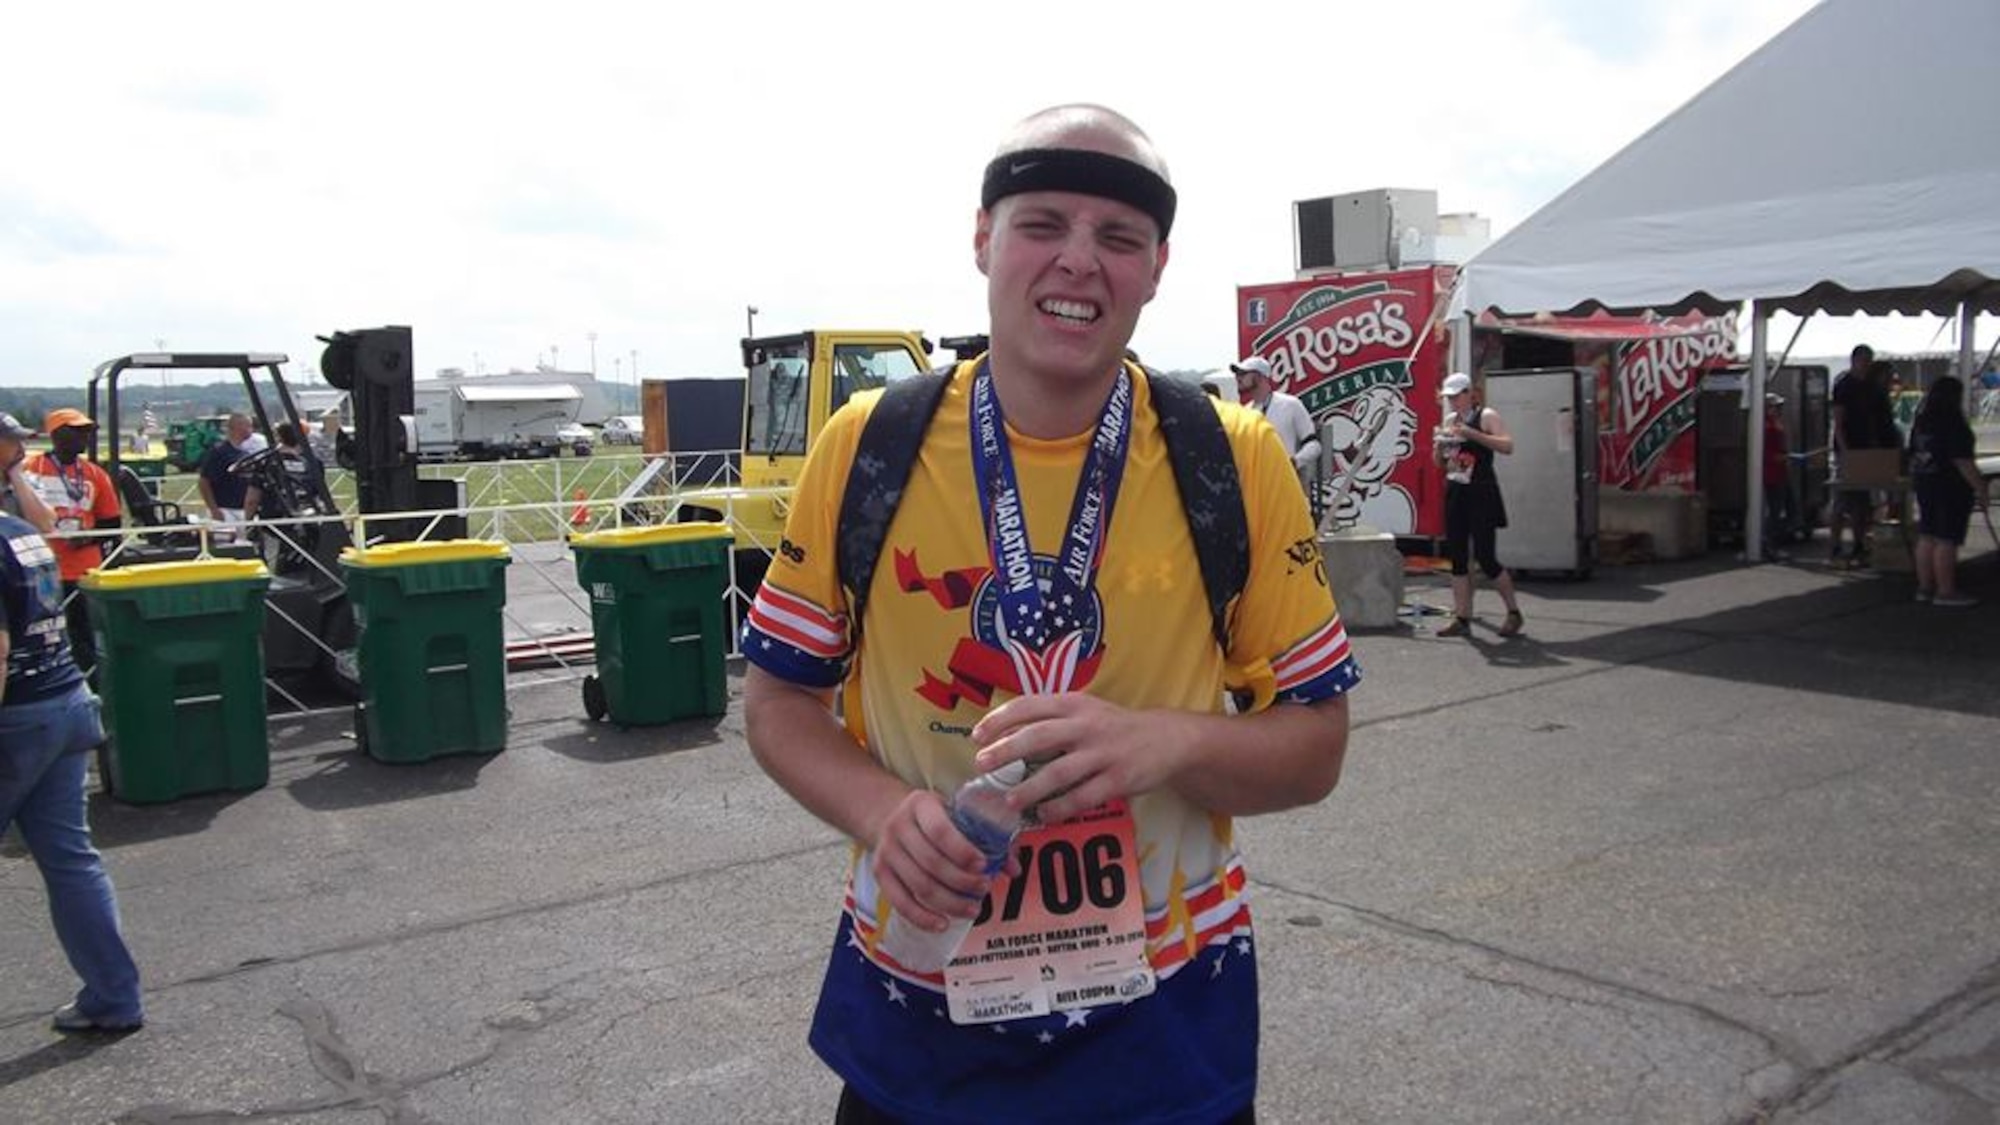 AFROTC Cadet Jesse Tewksbury finishes his first Air Force Marathon run in a little more than 5 hours. This run for him was a crowning achievement to his desire to get in shape and motivate his peers and family to do the same.